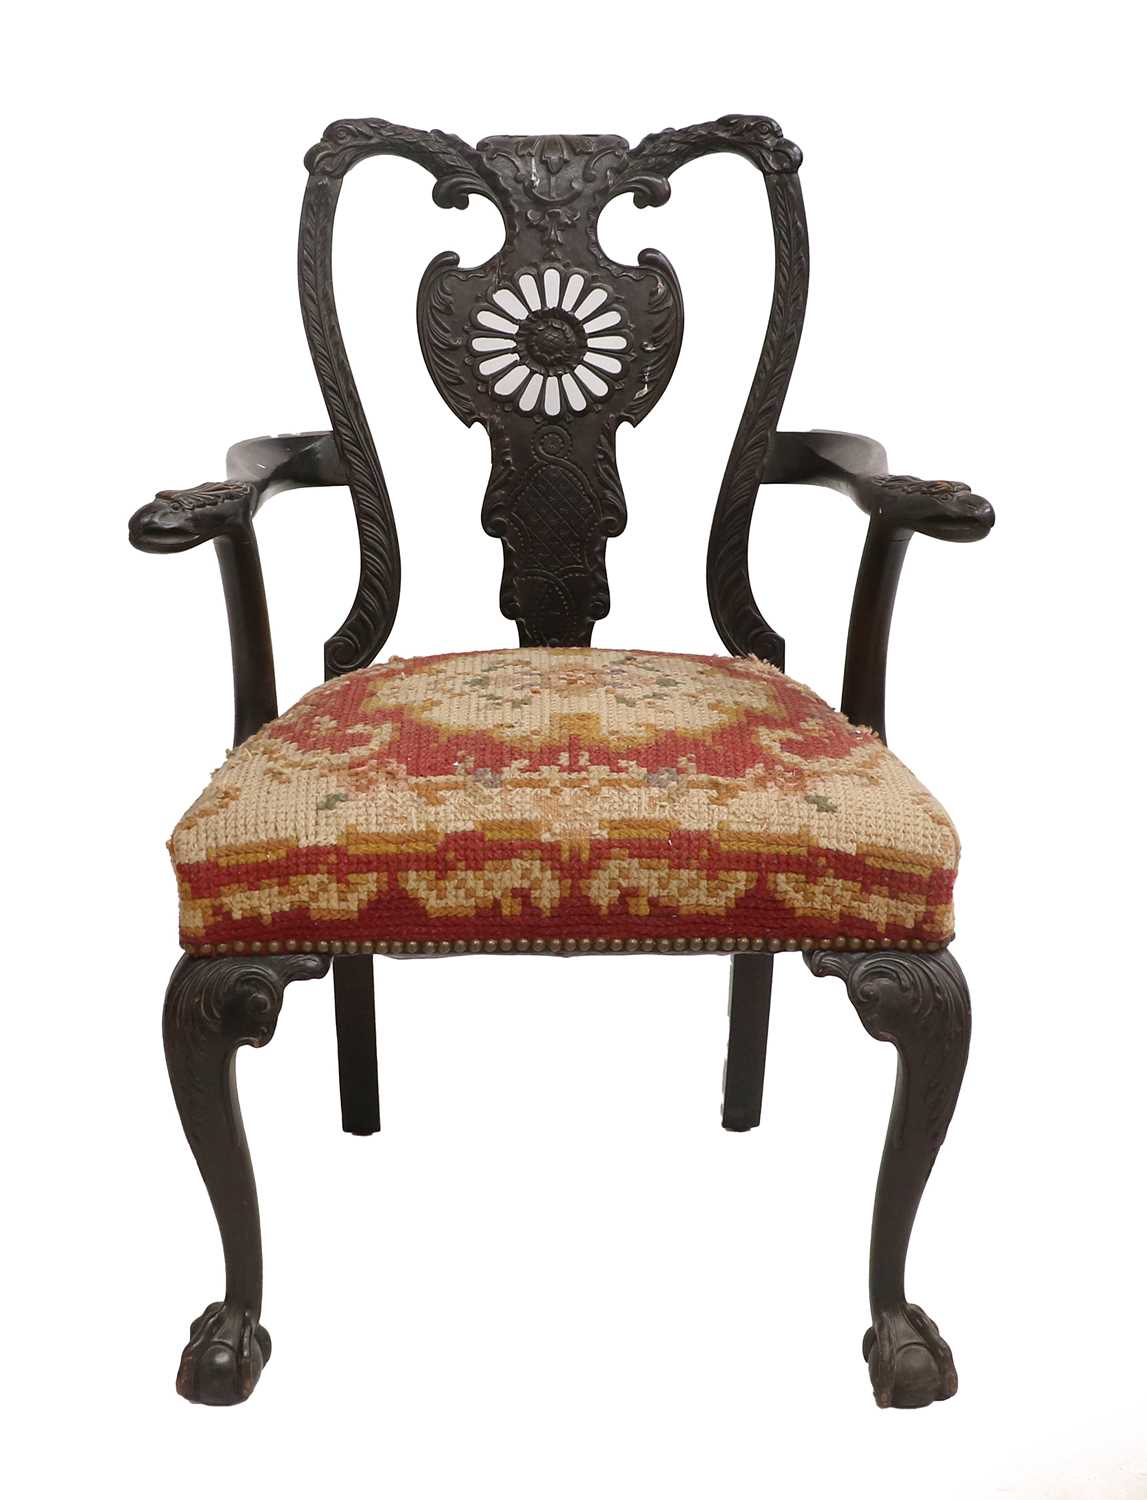 An Ornate 19th Century Carved Open Armchair, carved with eagle head crest rail and arms on claw - Image 2 of 2